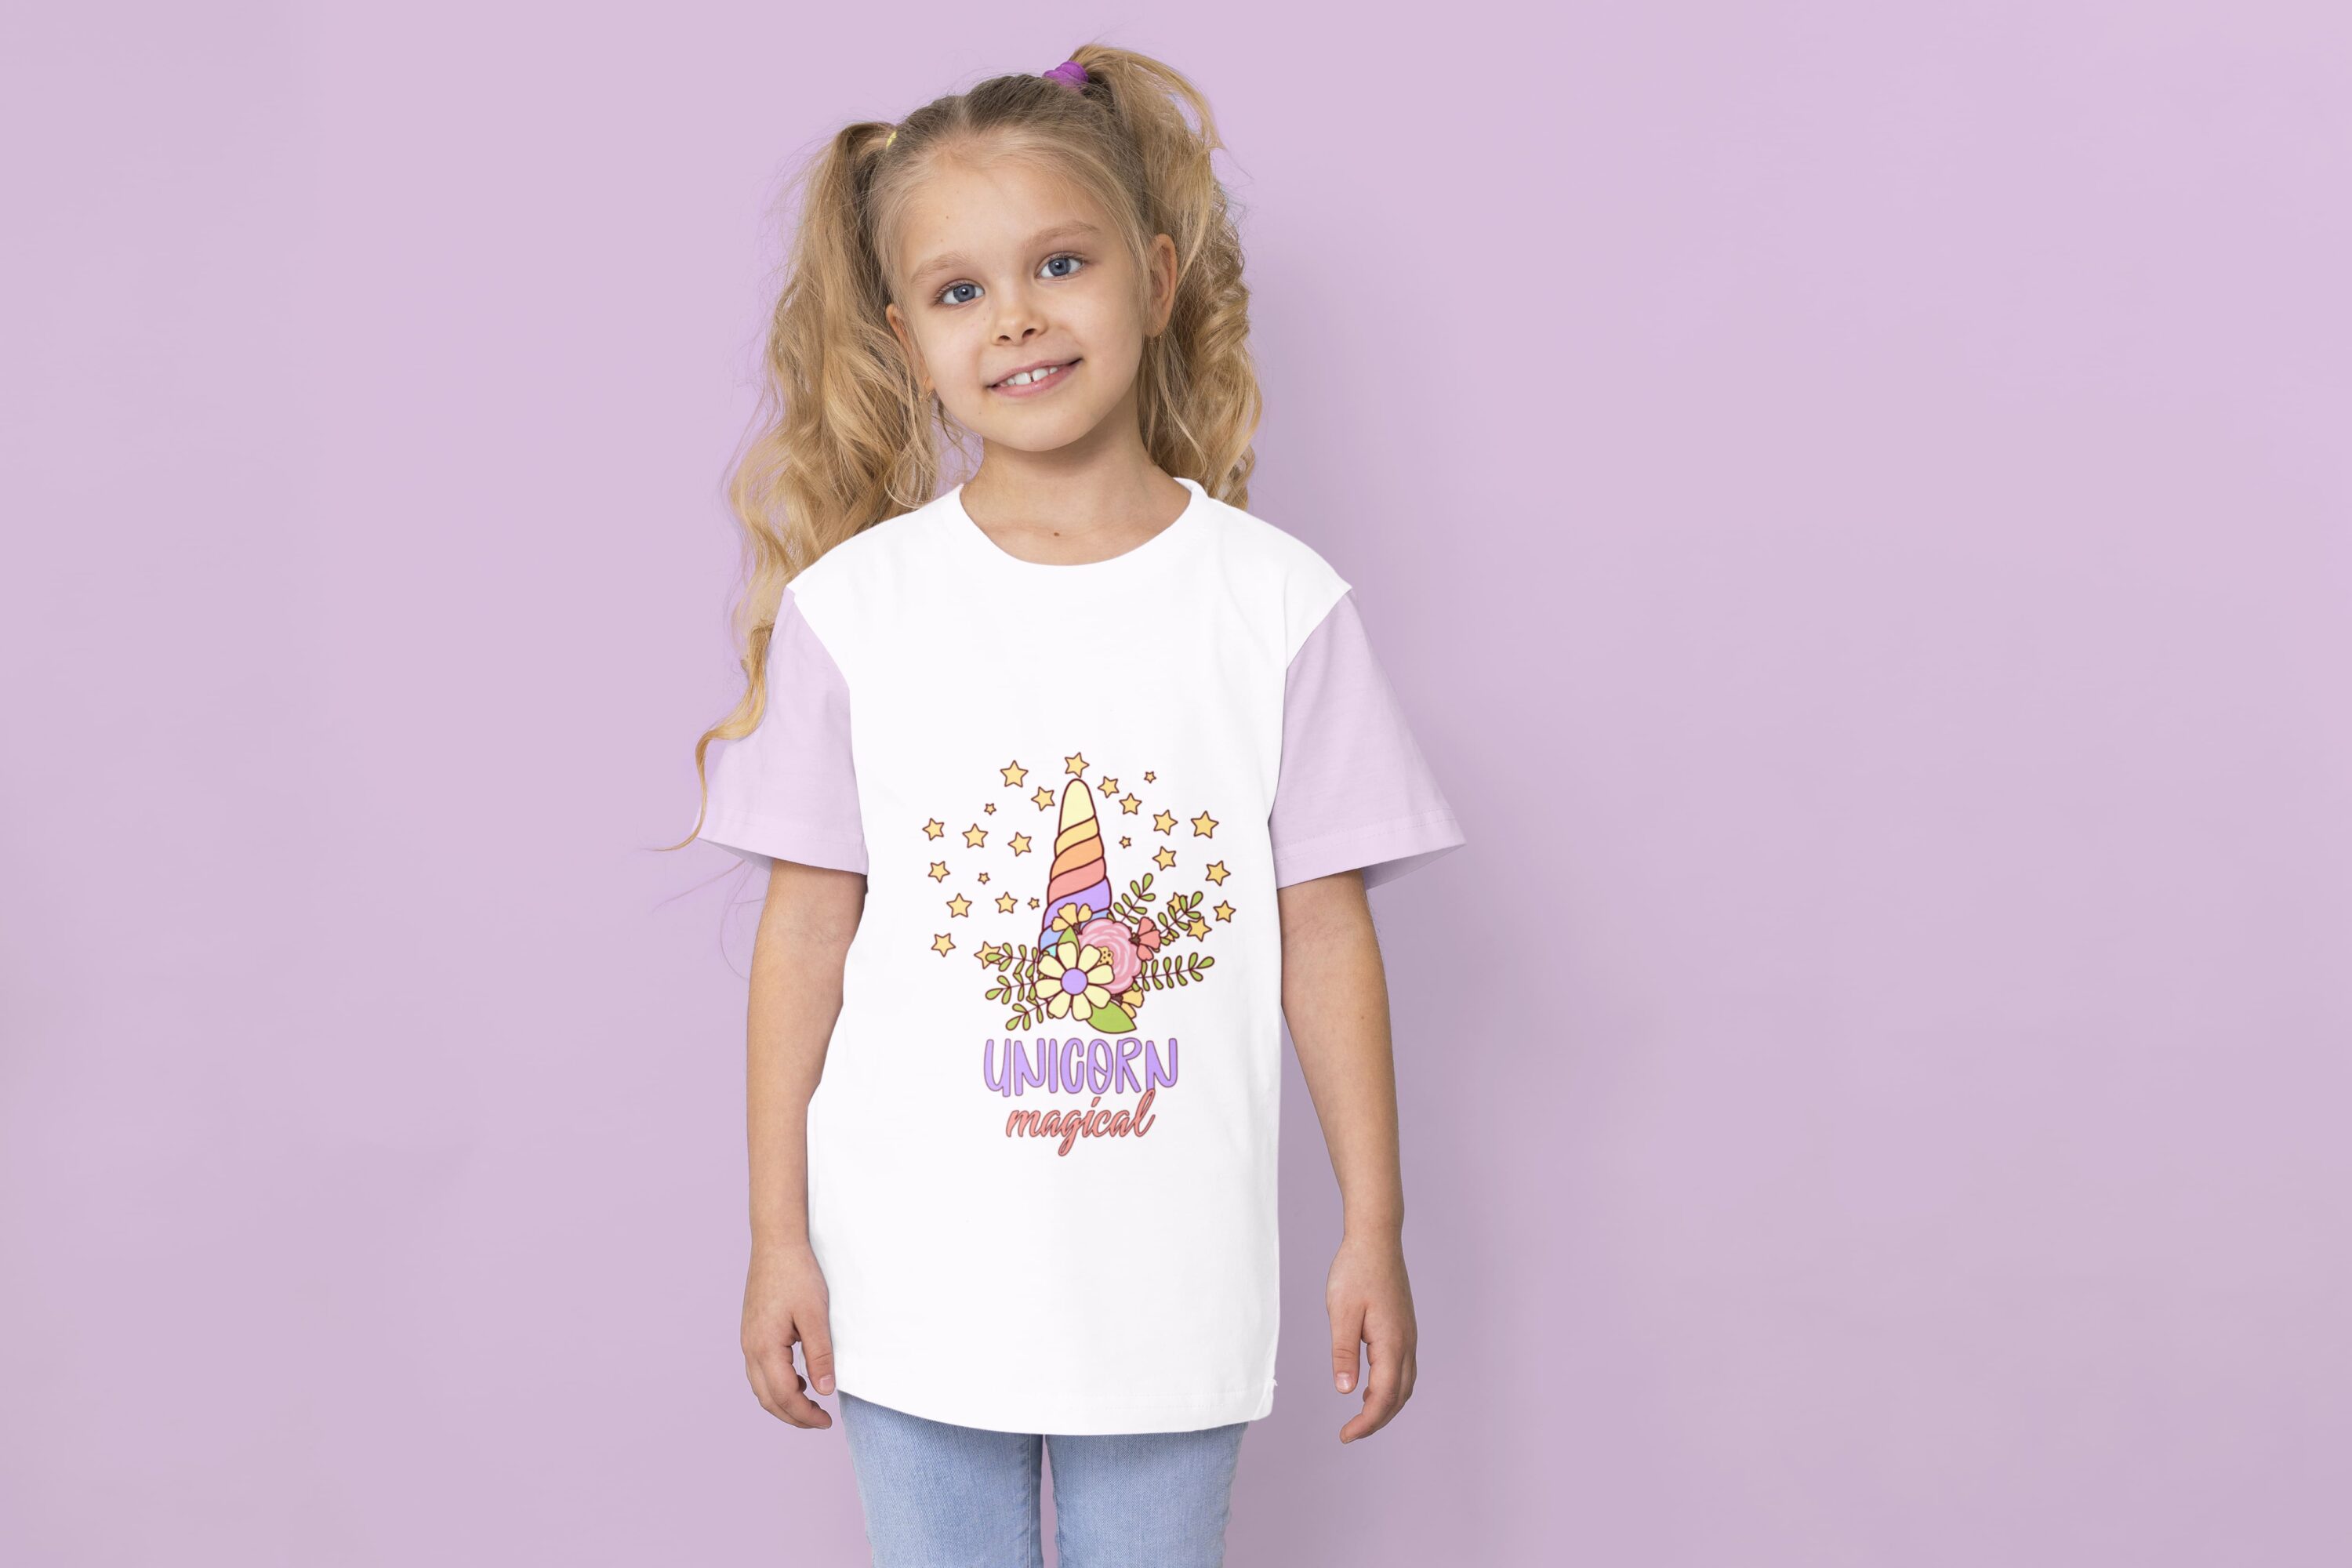 A white t-shirt with lavender sleeves and a colorful unicorn horn with stars and lavender lettering "UNICORN" with pink lettering "magical" on a girl against a lavender background.